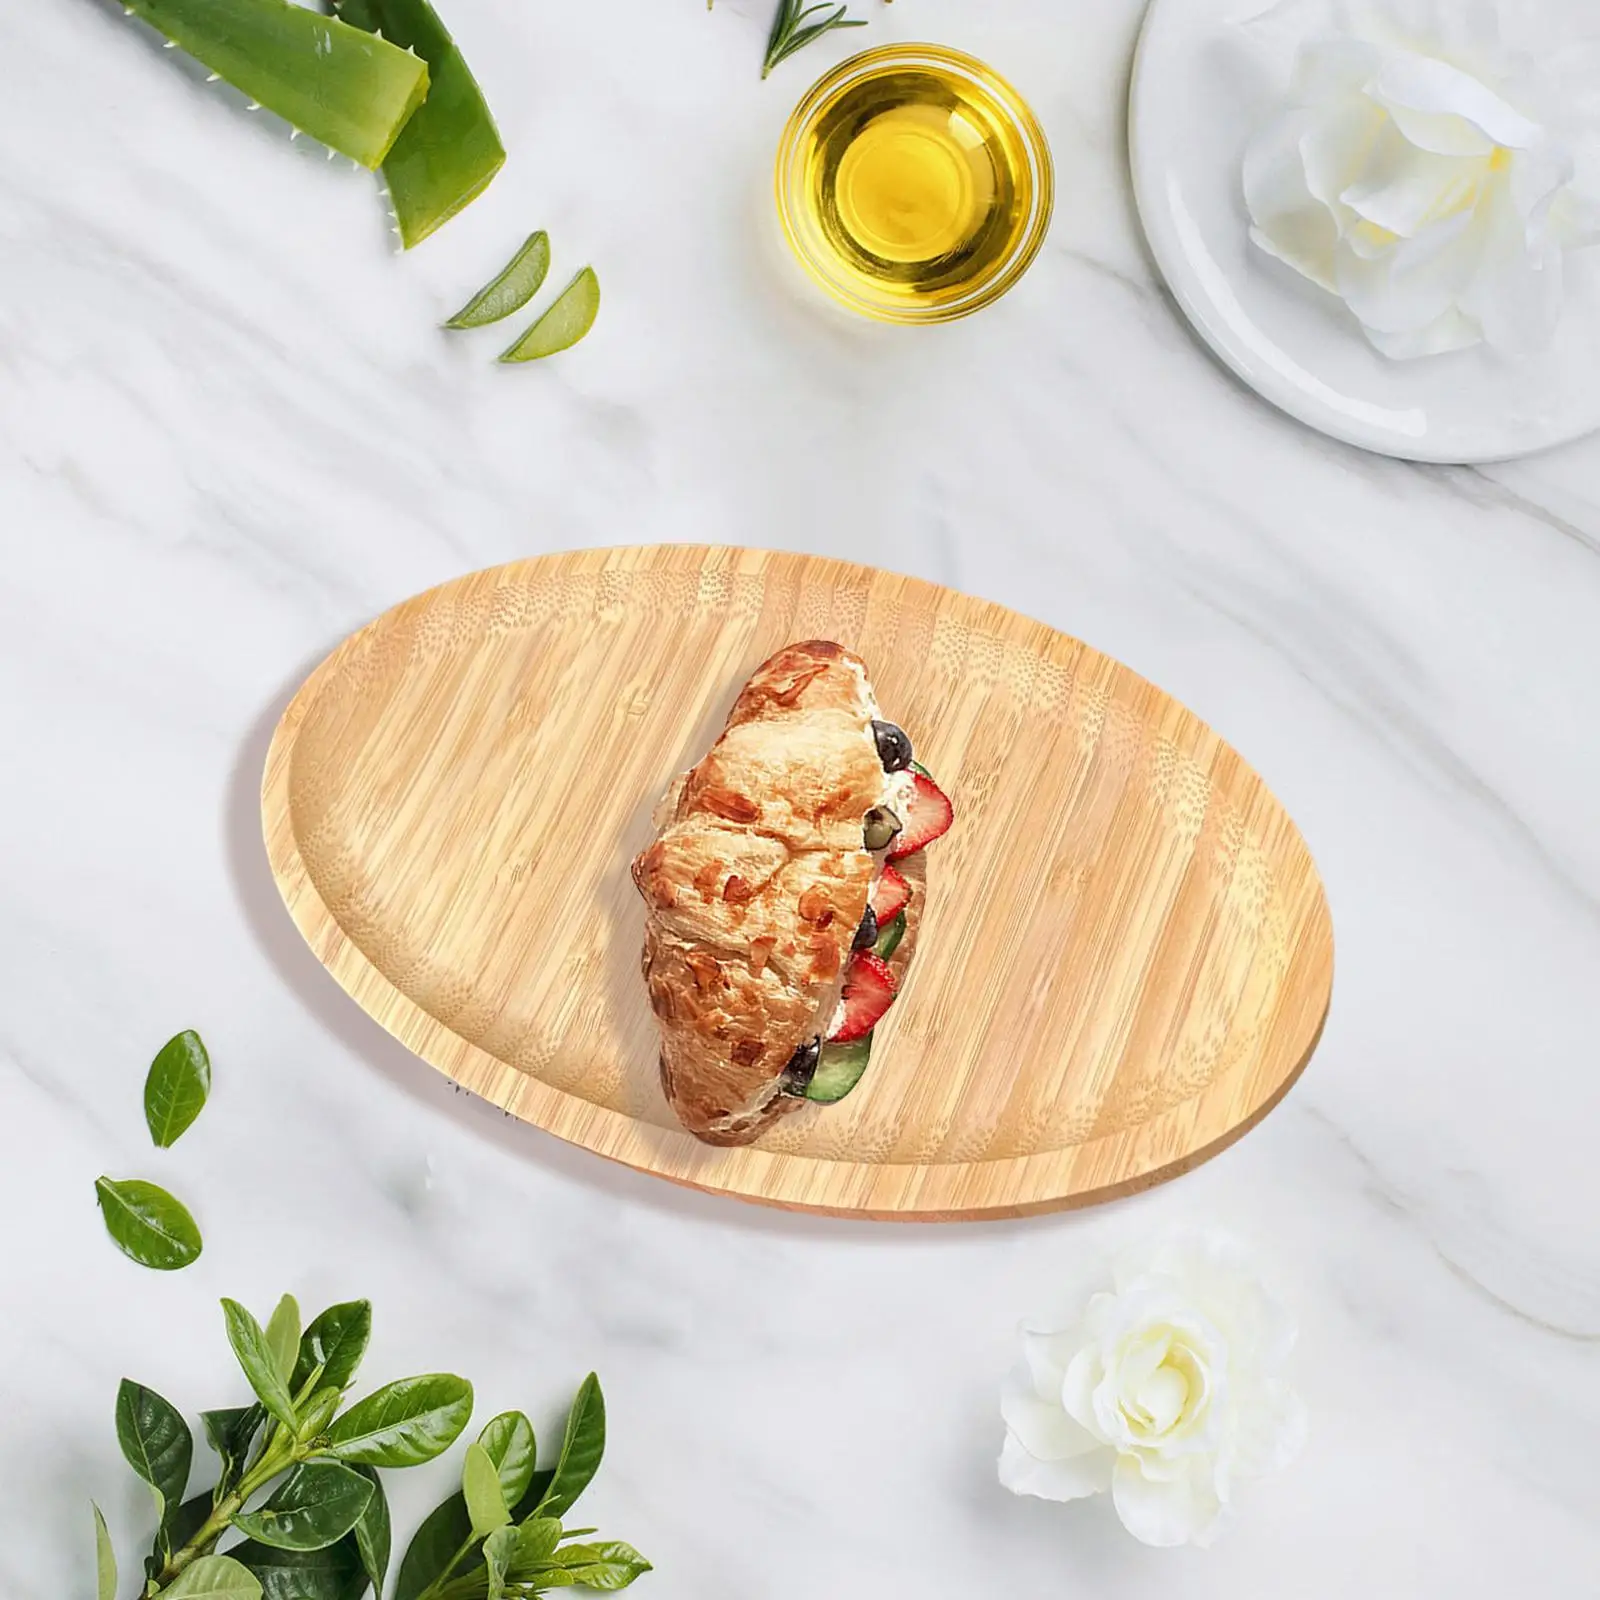 Wood Tray Housewarming Gift Farmhouse Decorative Tray for Home Kitchen Decor Coffee Table Afternoon Tea Bread Meat Vegetables